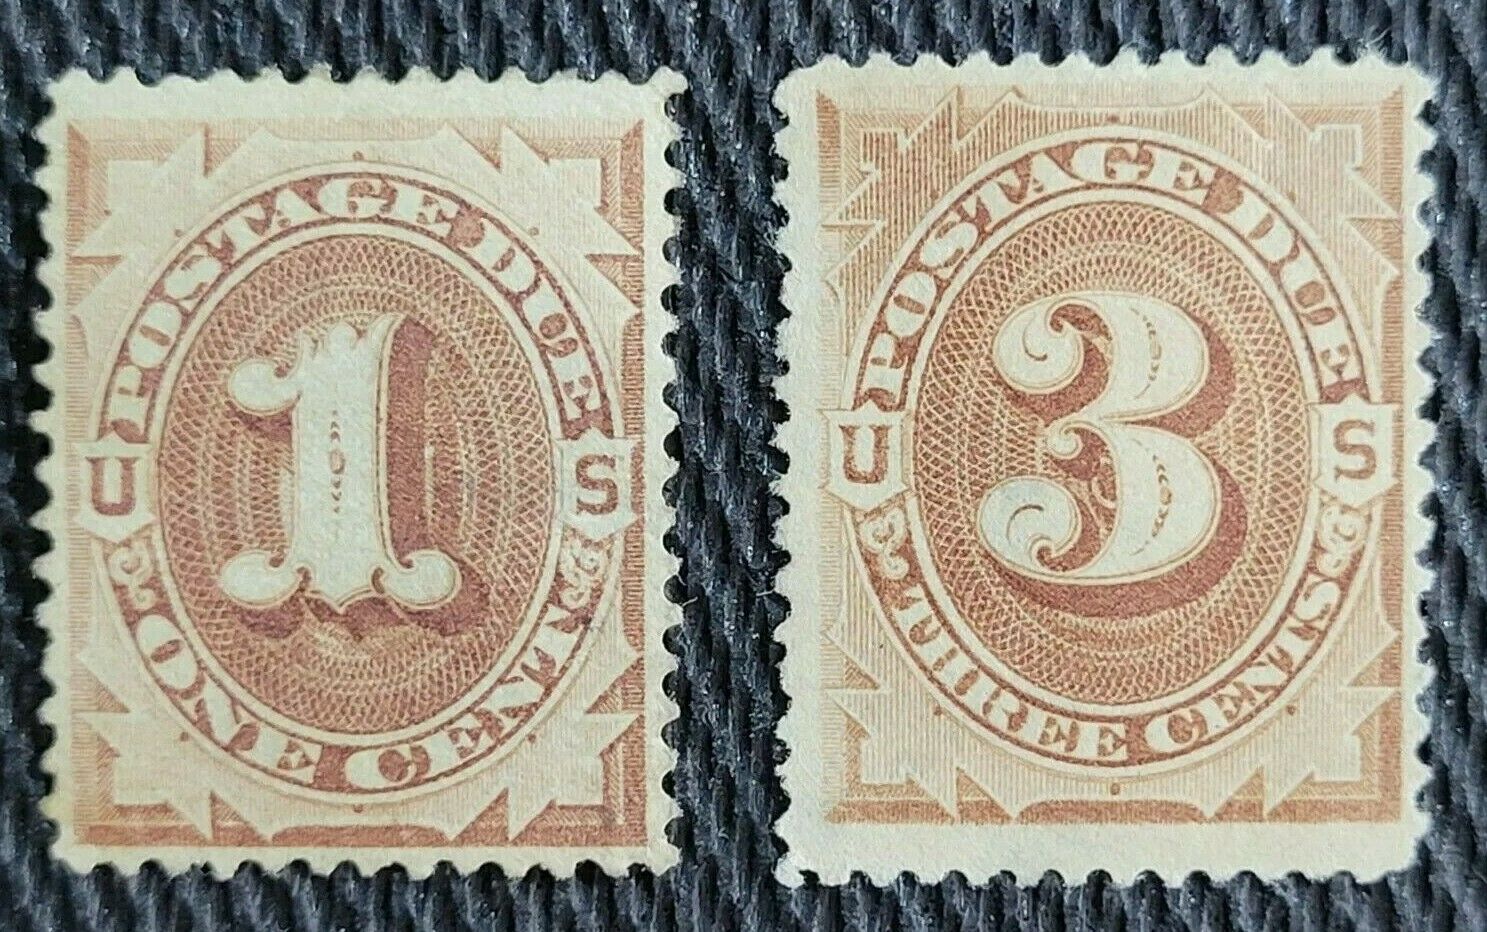 Pucci's Scott # J1 & J2 Postage Due Un-used Well Centered Both Have Small Thins.